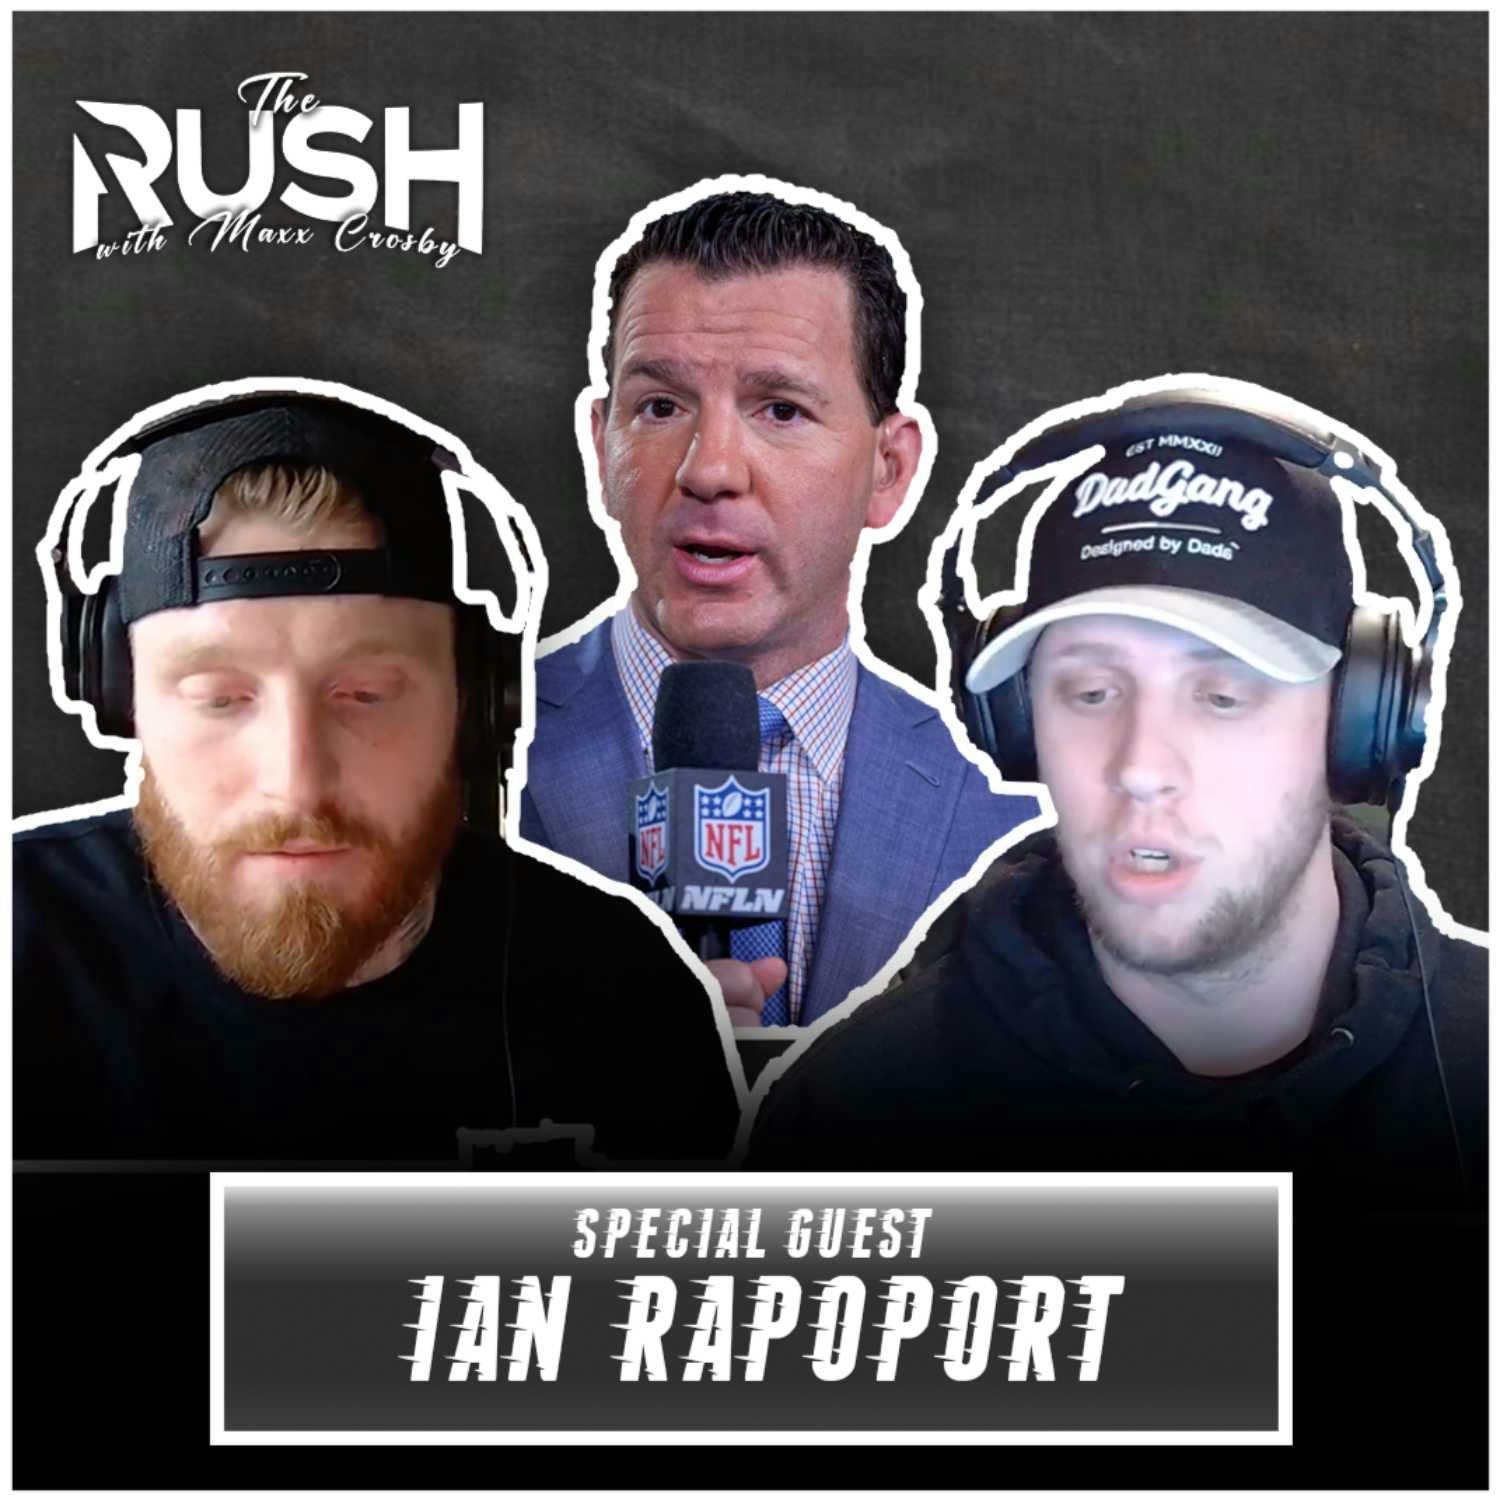 IAN RAPOPORT JOINS THE RUSH, AP HIRED, JIM HARBAUGH, DIVISIONAL PLAYOFF PREDICTIONS | The Rush | EP. 16